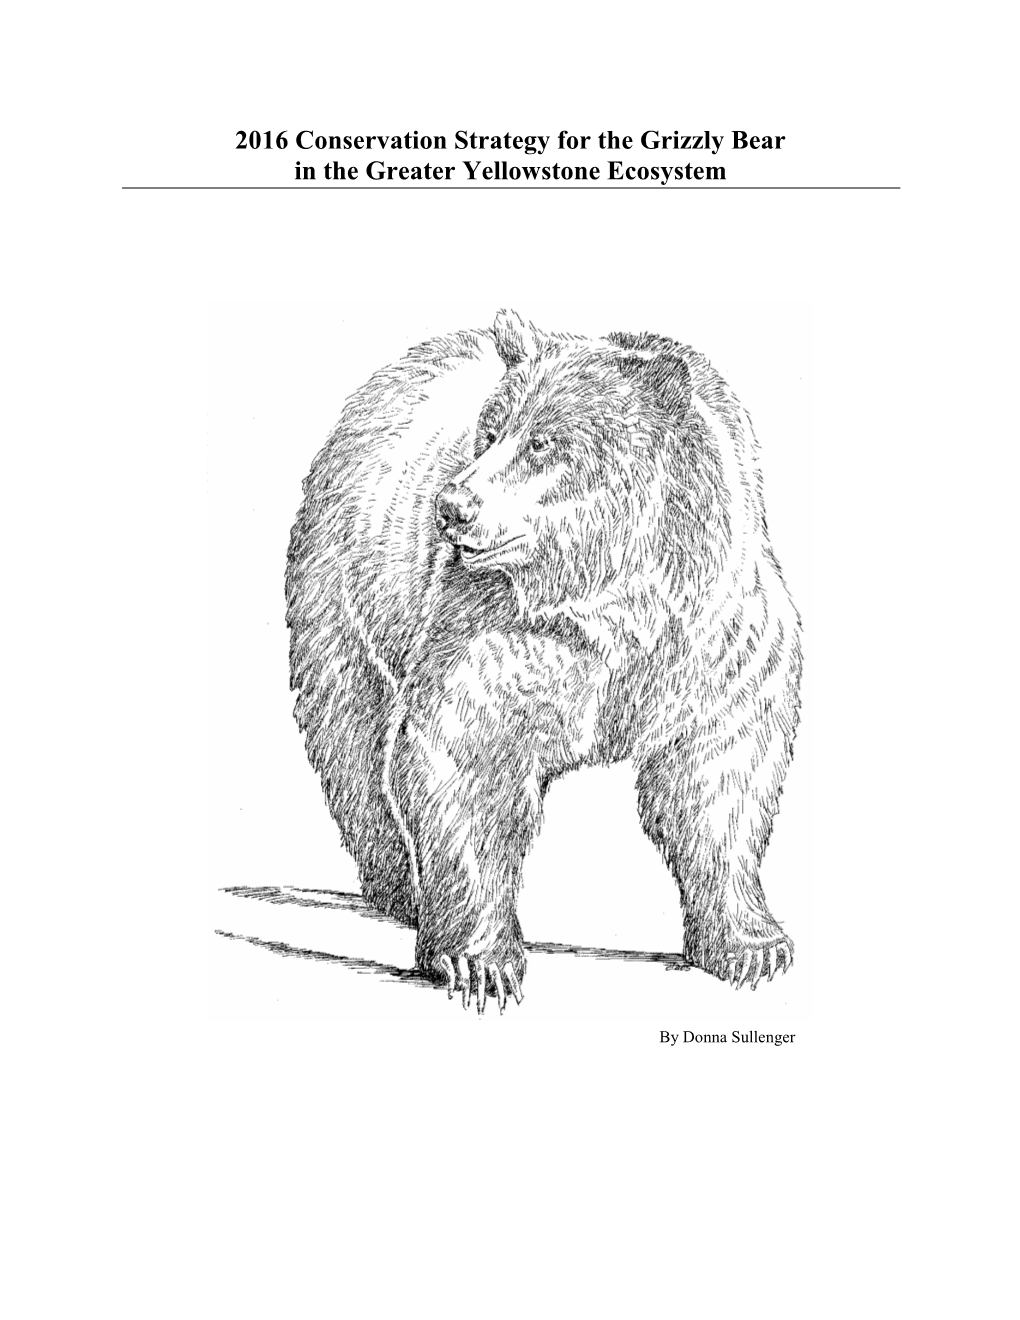 2016 Conservation Strategy for the Grizzly Bear in the Greater Yellowstone Ecosystem